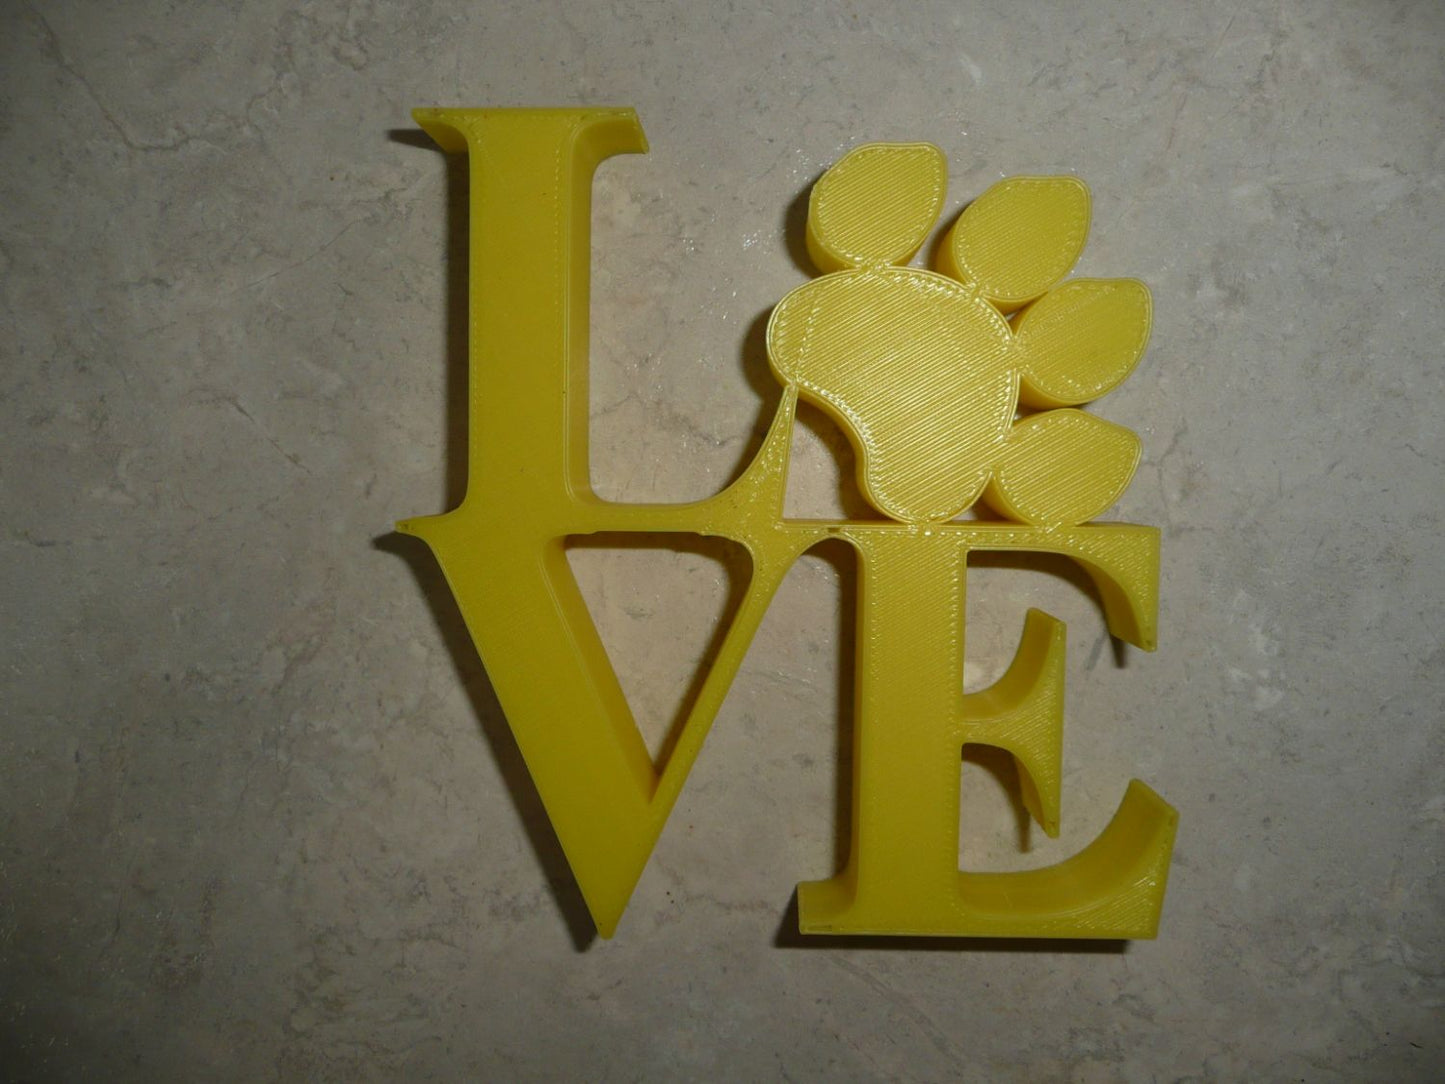 Love Word with Paw Print Table Shelf Home Office Decor Yellow Made in USA PR4848